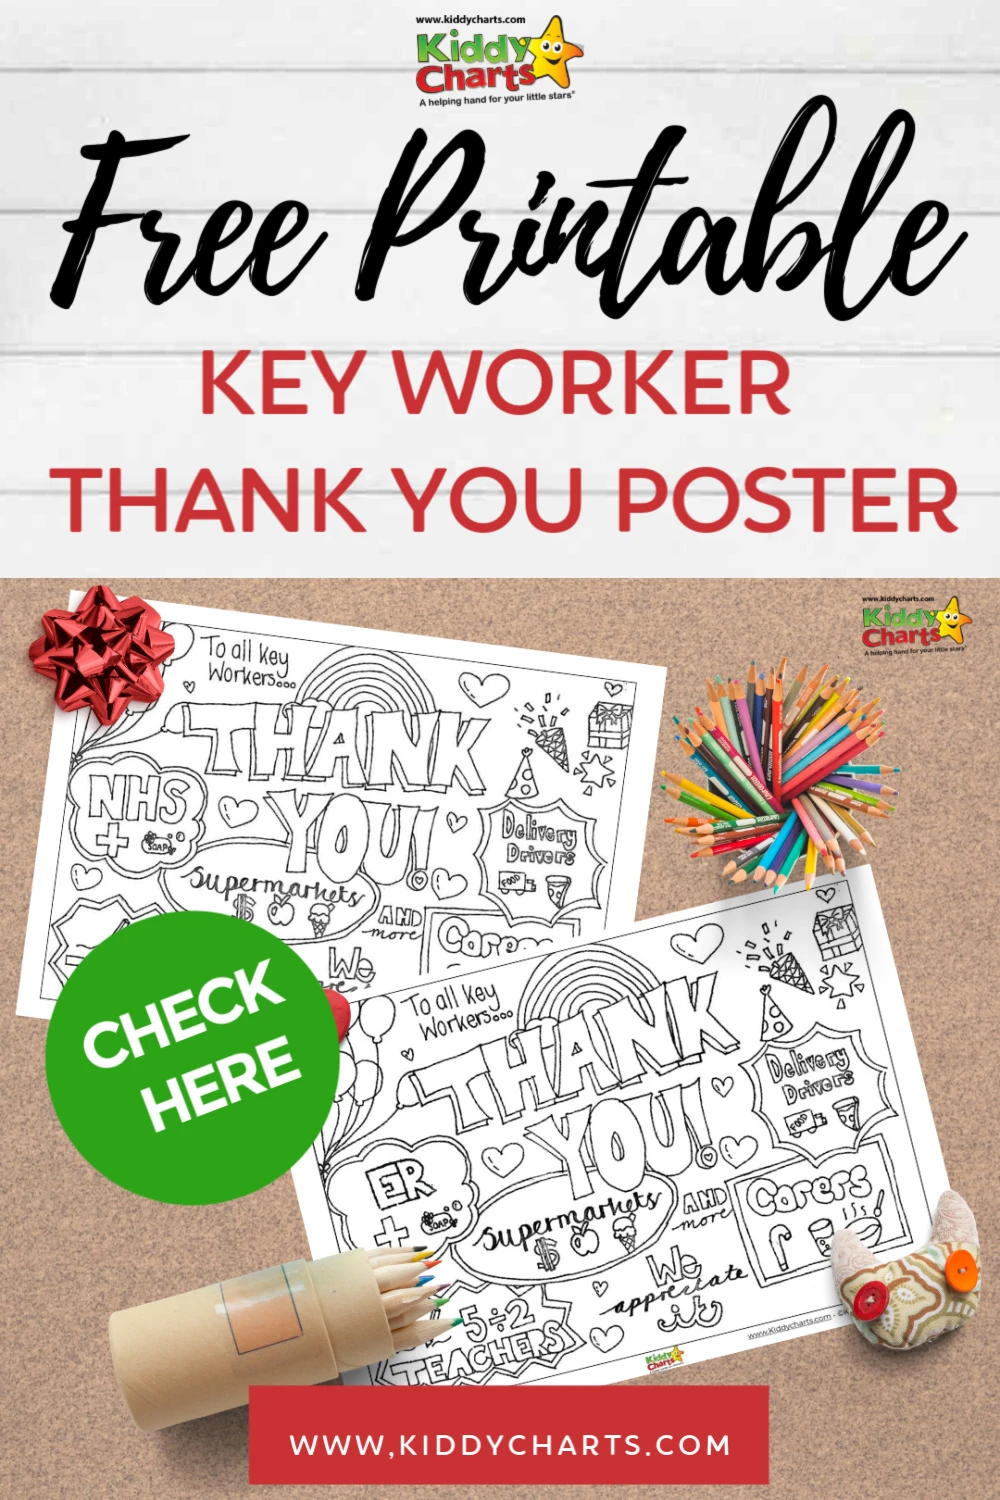 Free printable key worker thank you poster 